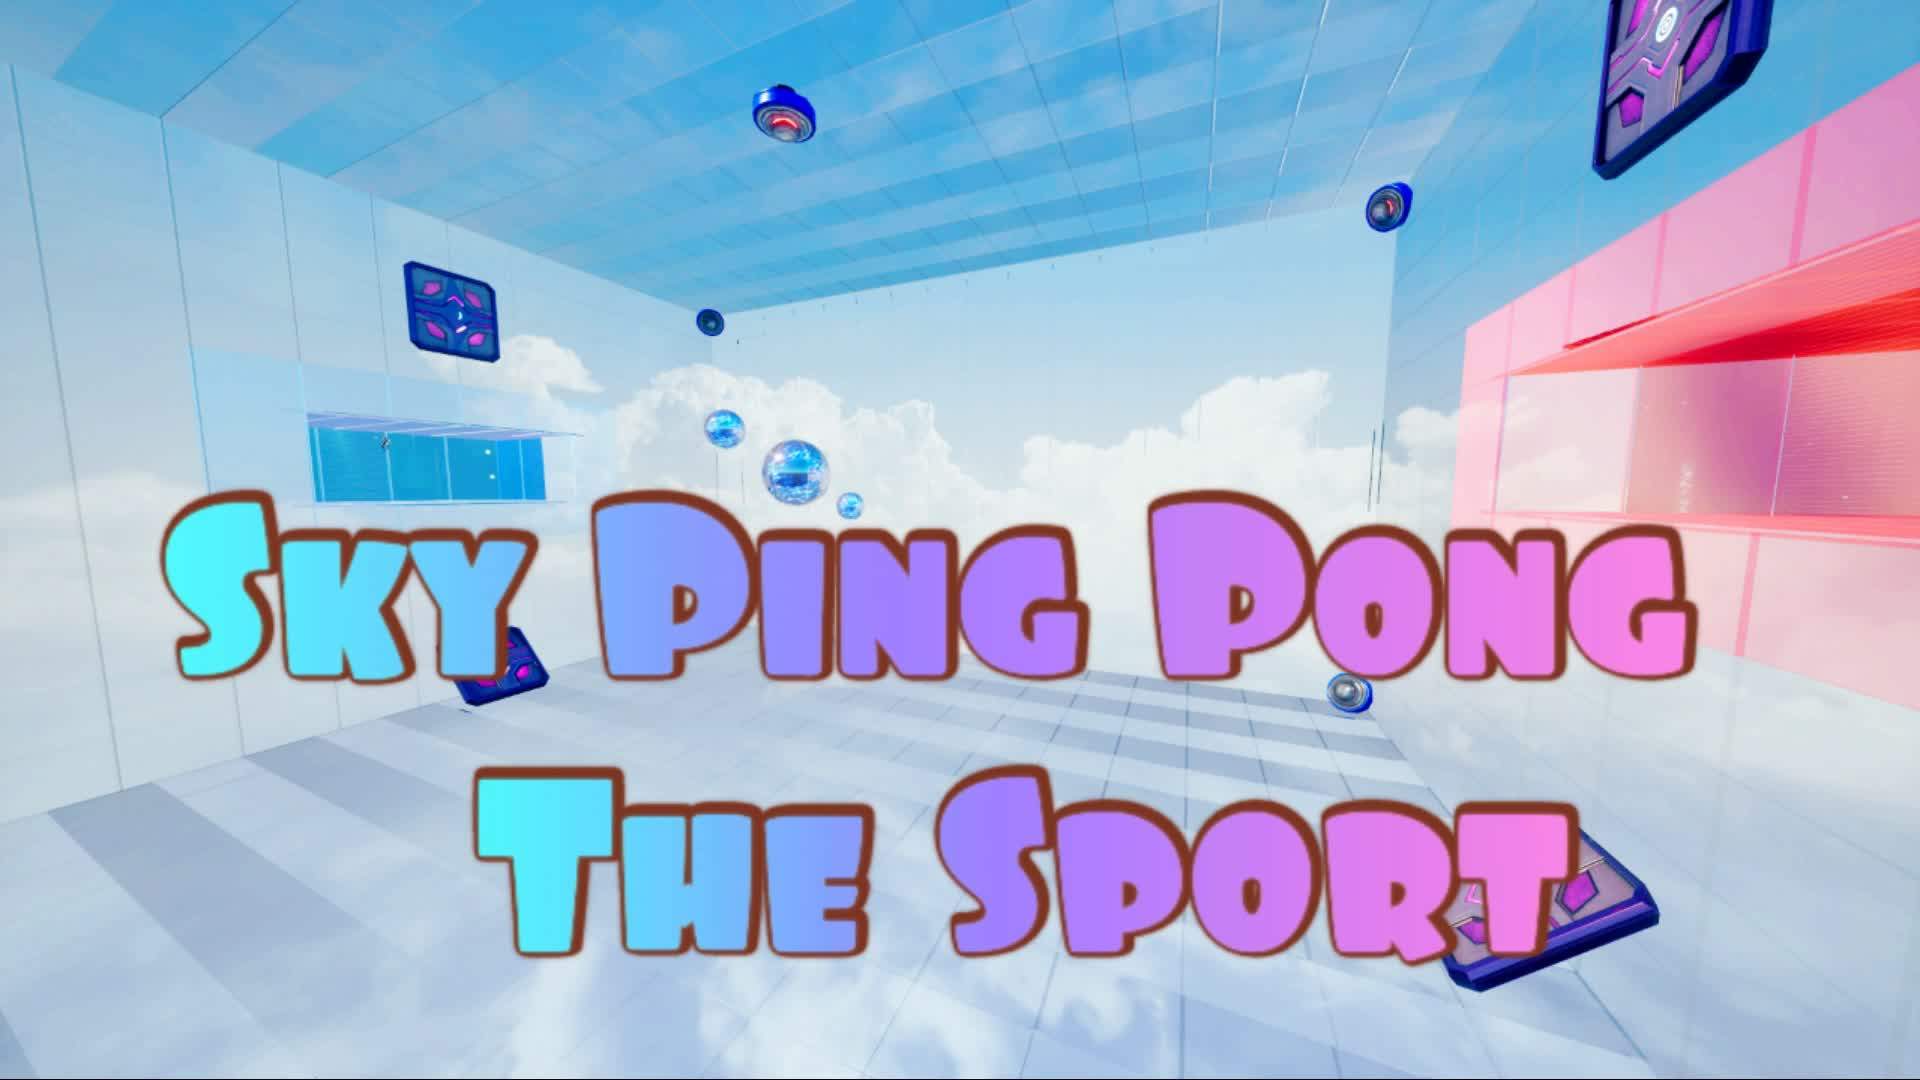 Sky Ping Pong - The Sport